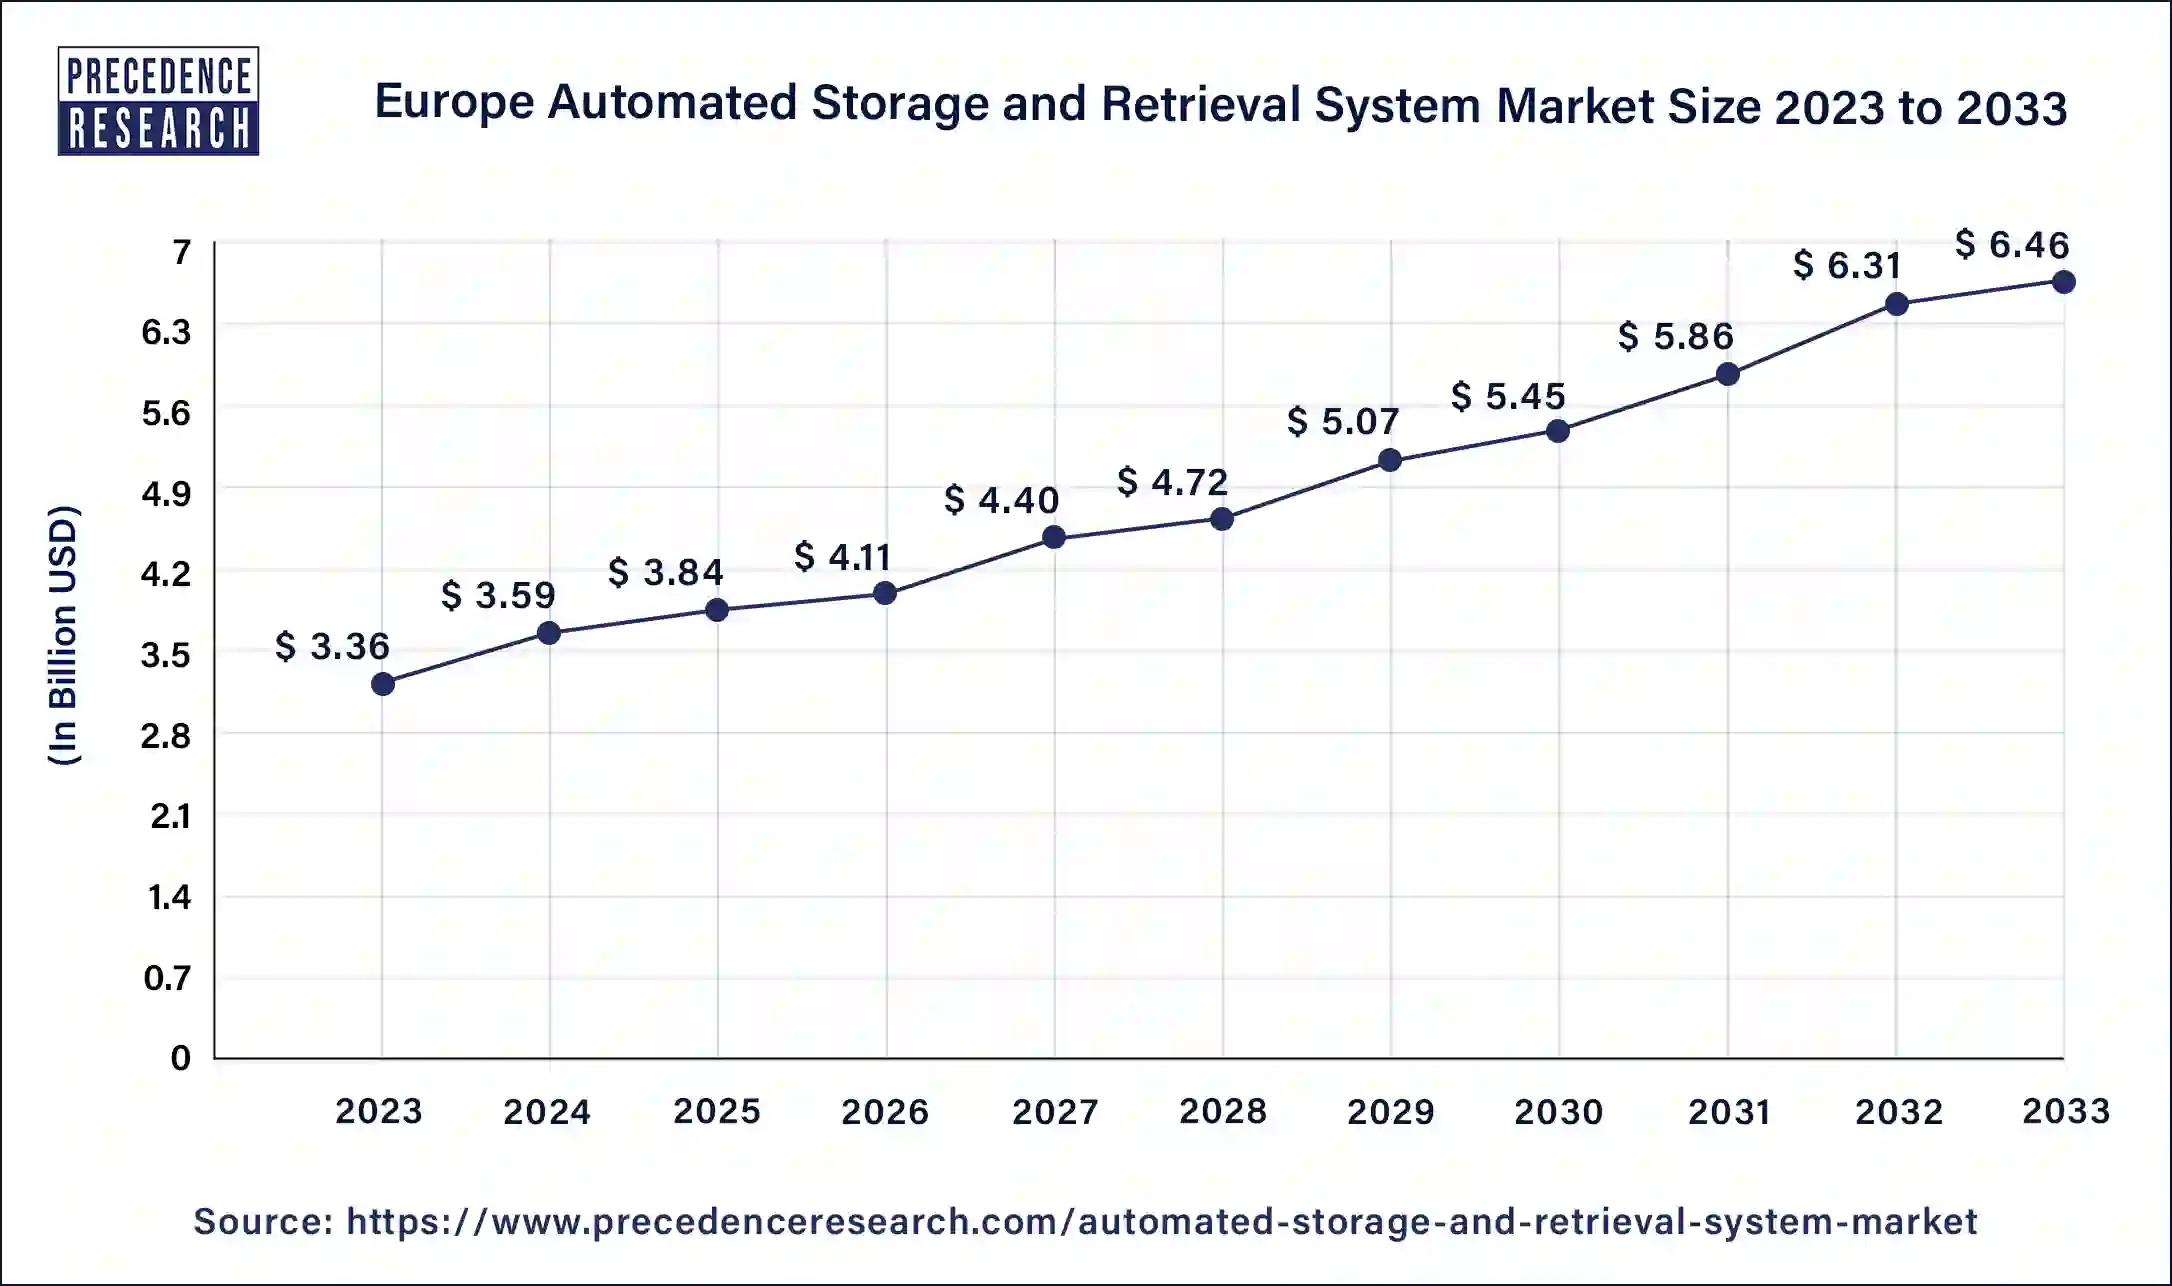 Europe Automated Storage and Retrieval System Market Size 2024 to 2033